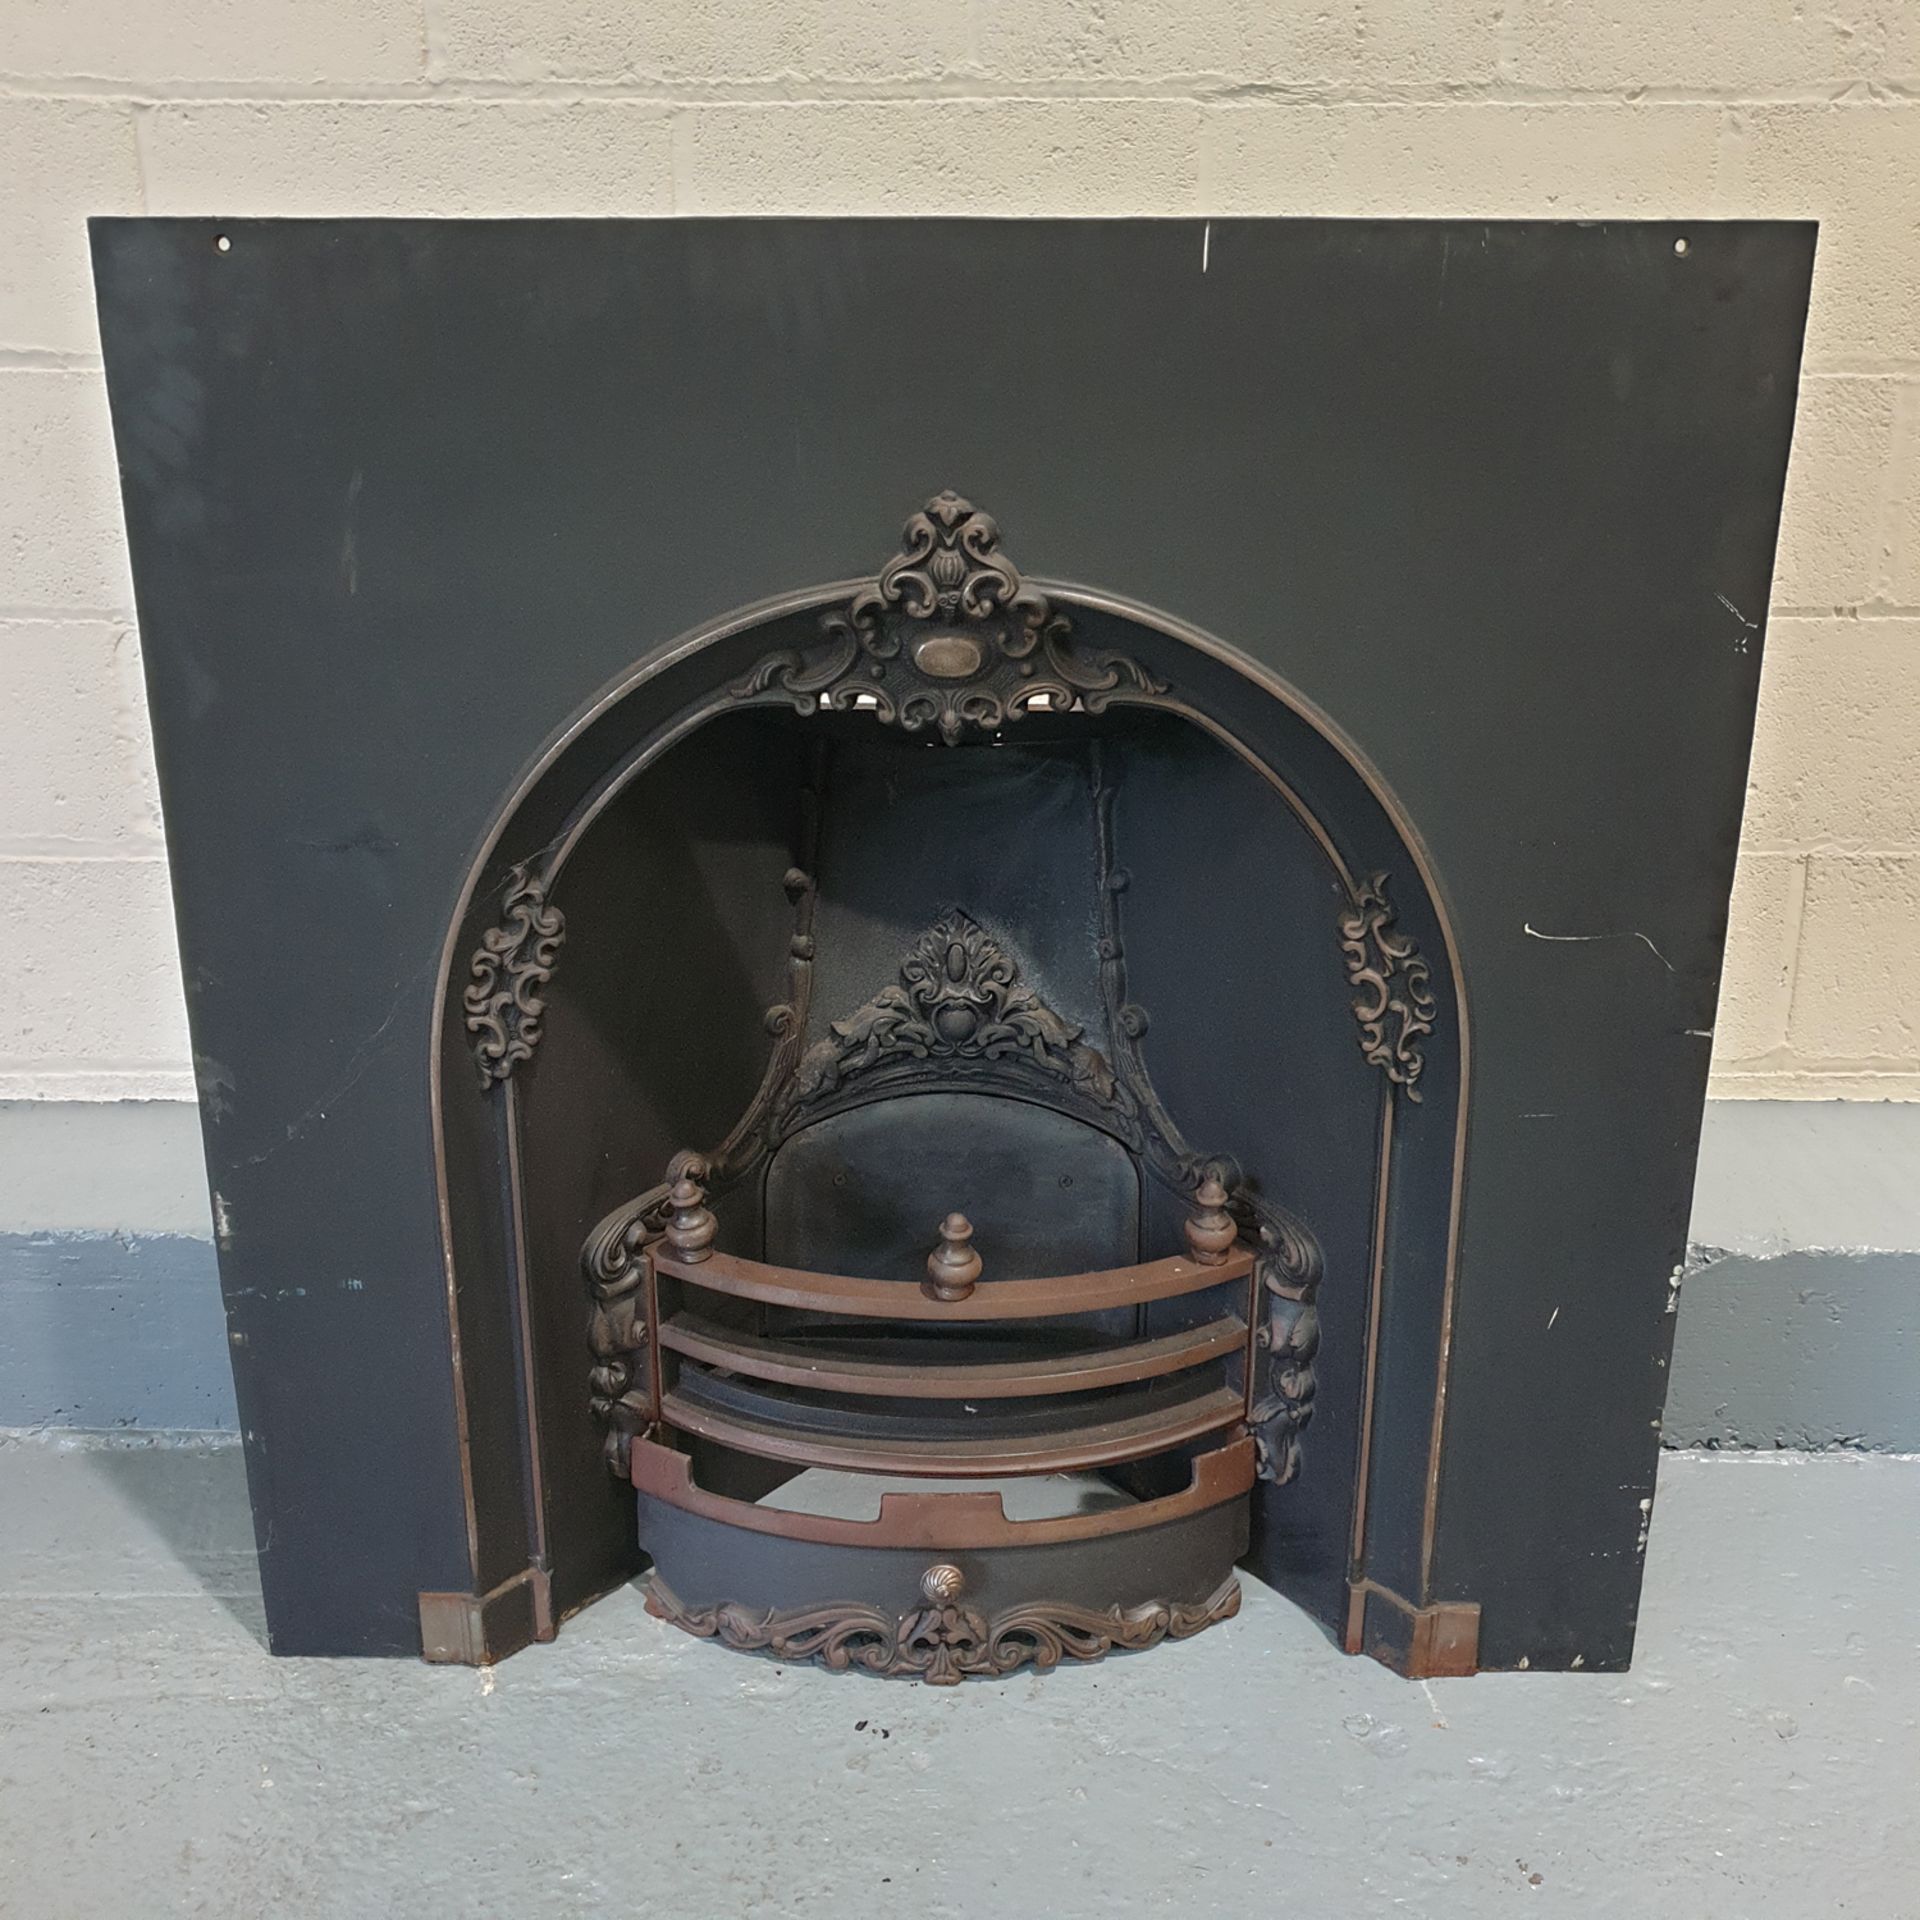 Cast Iron Fireplace Approx Dimensions 40" x 40".